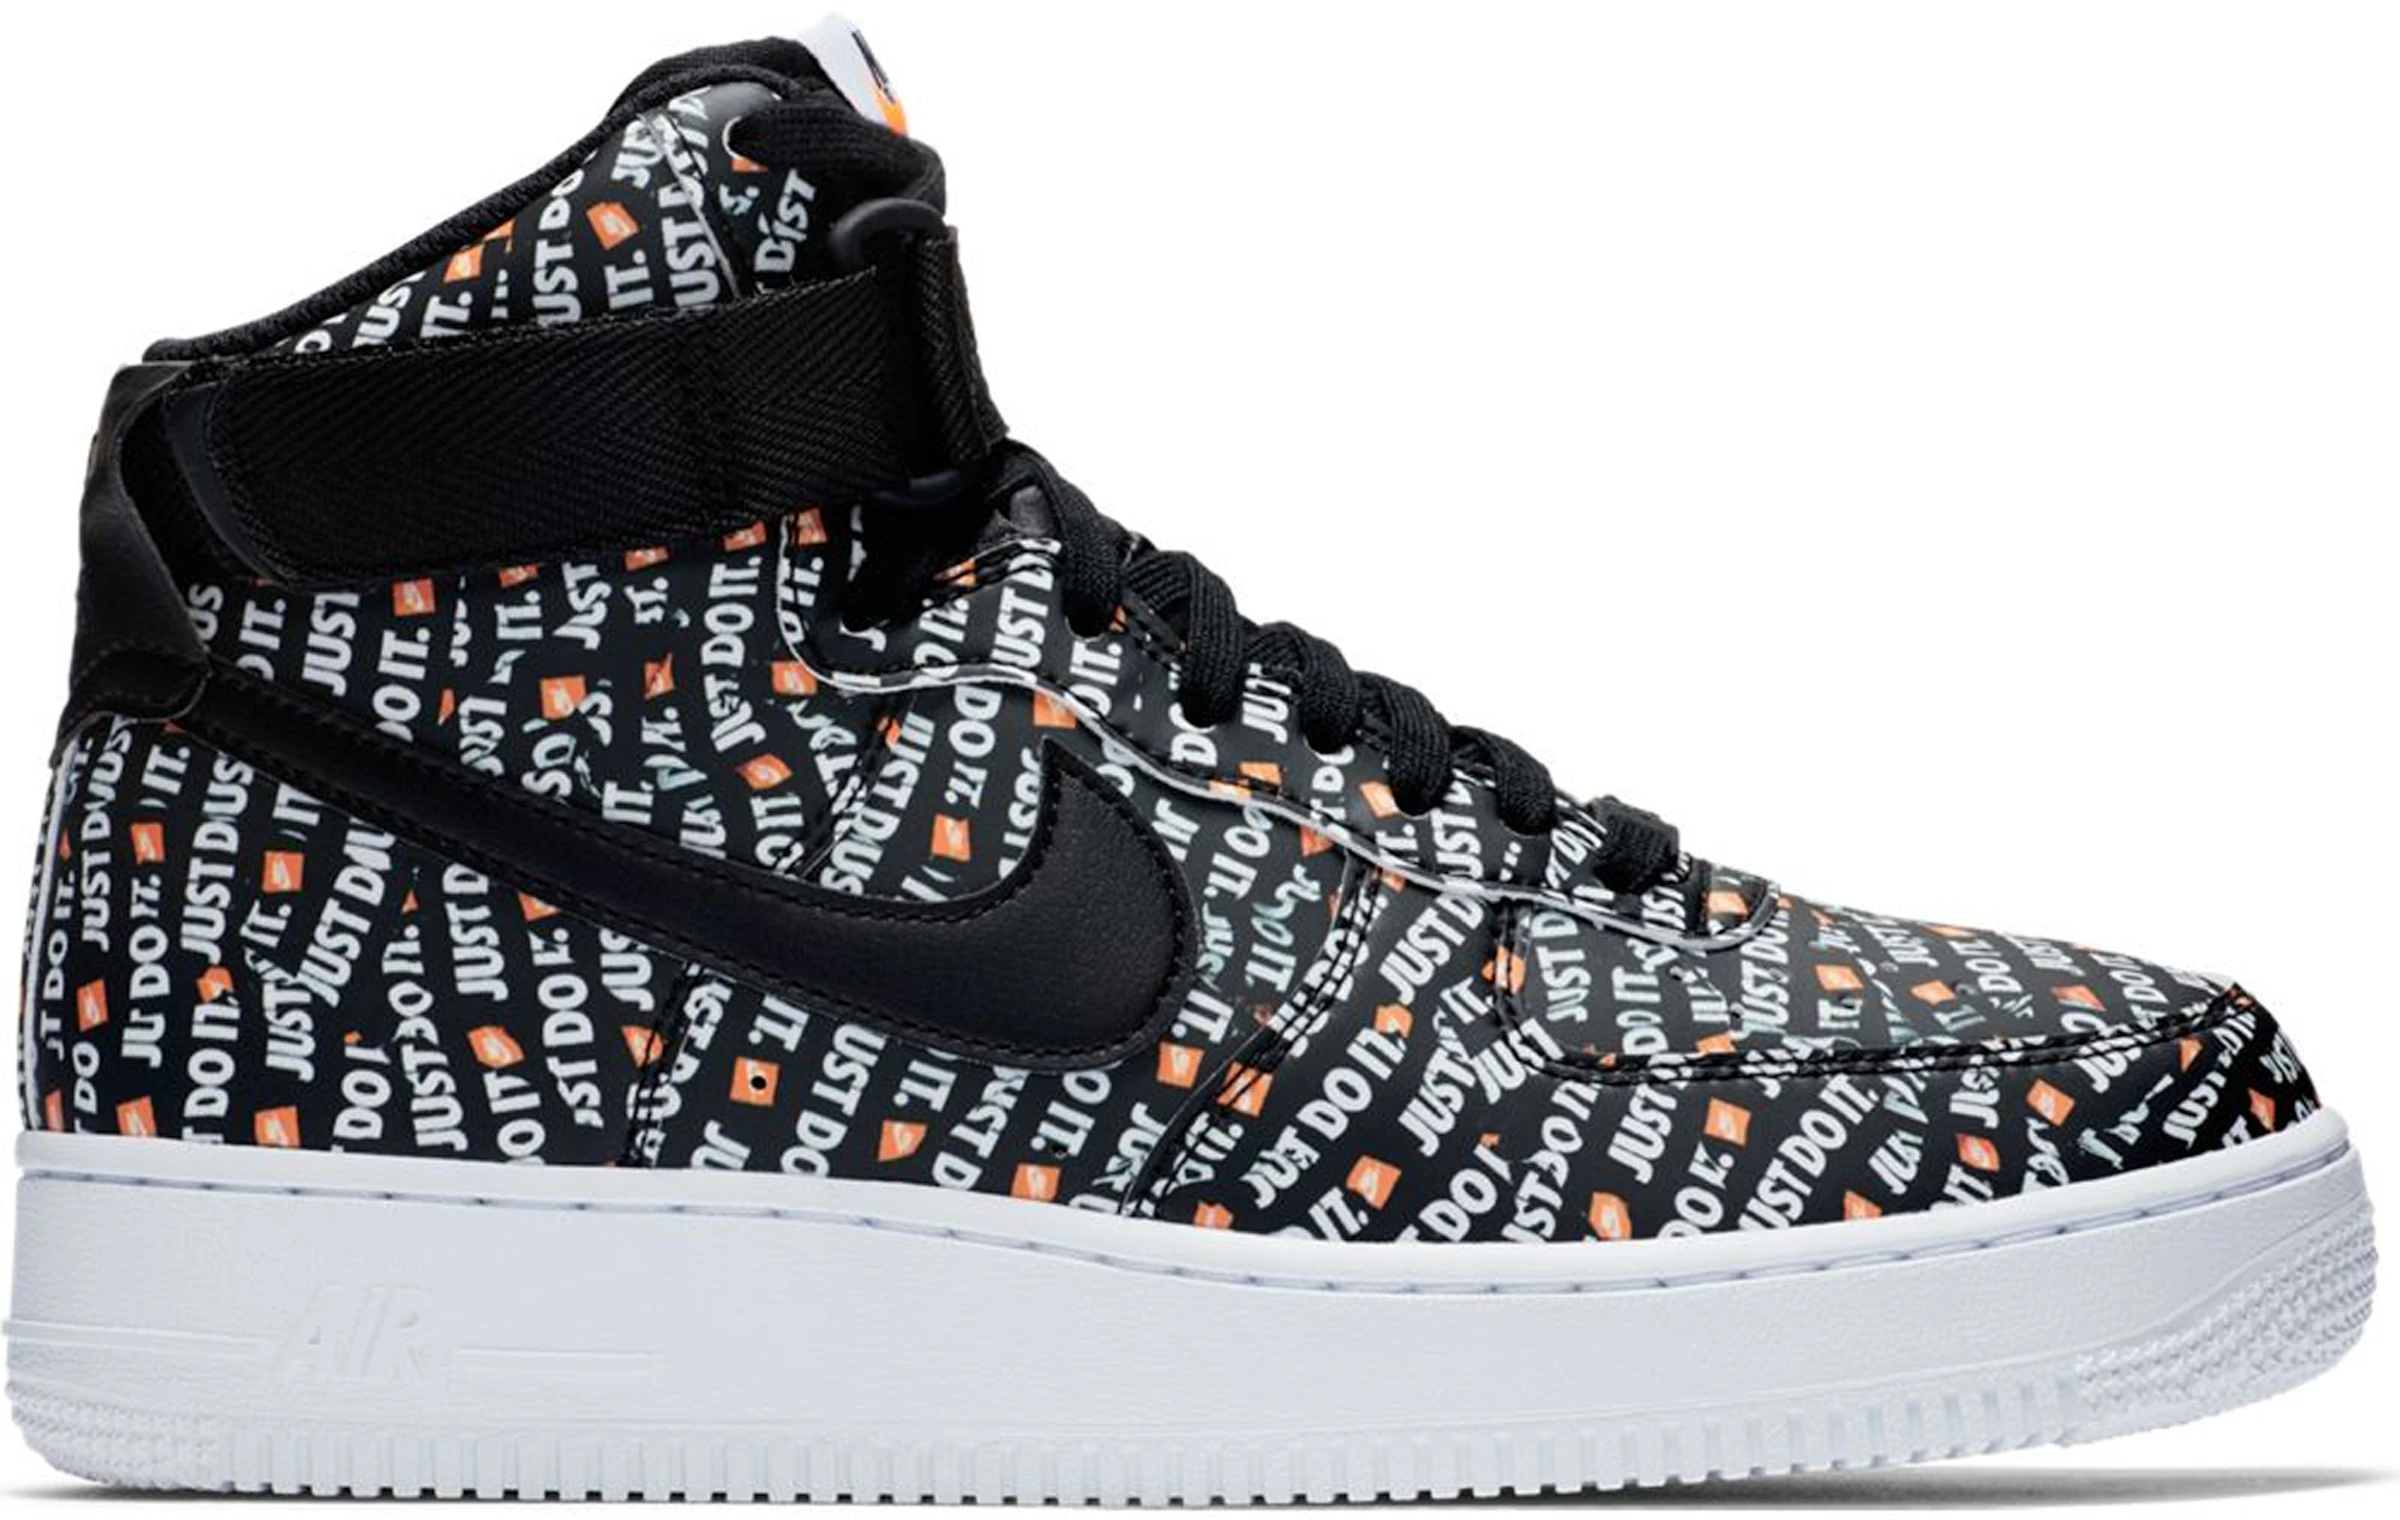 Extinto Grillo Anoi Nike Air Force 1 High Just Do It Pack Black (W) - AO5138-001 - ES